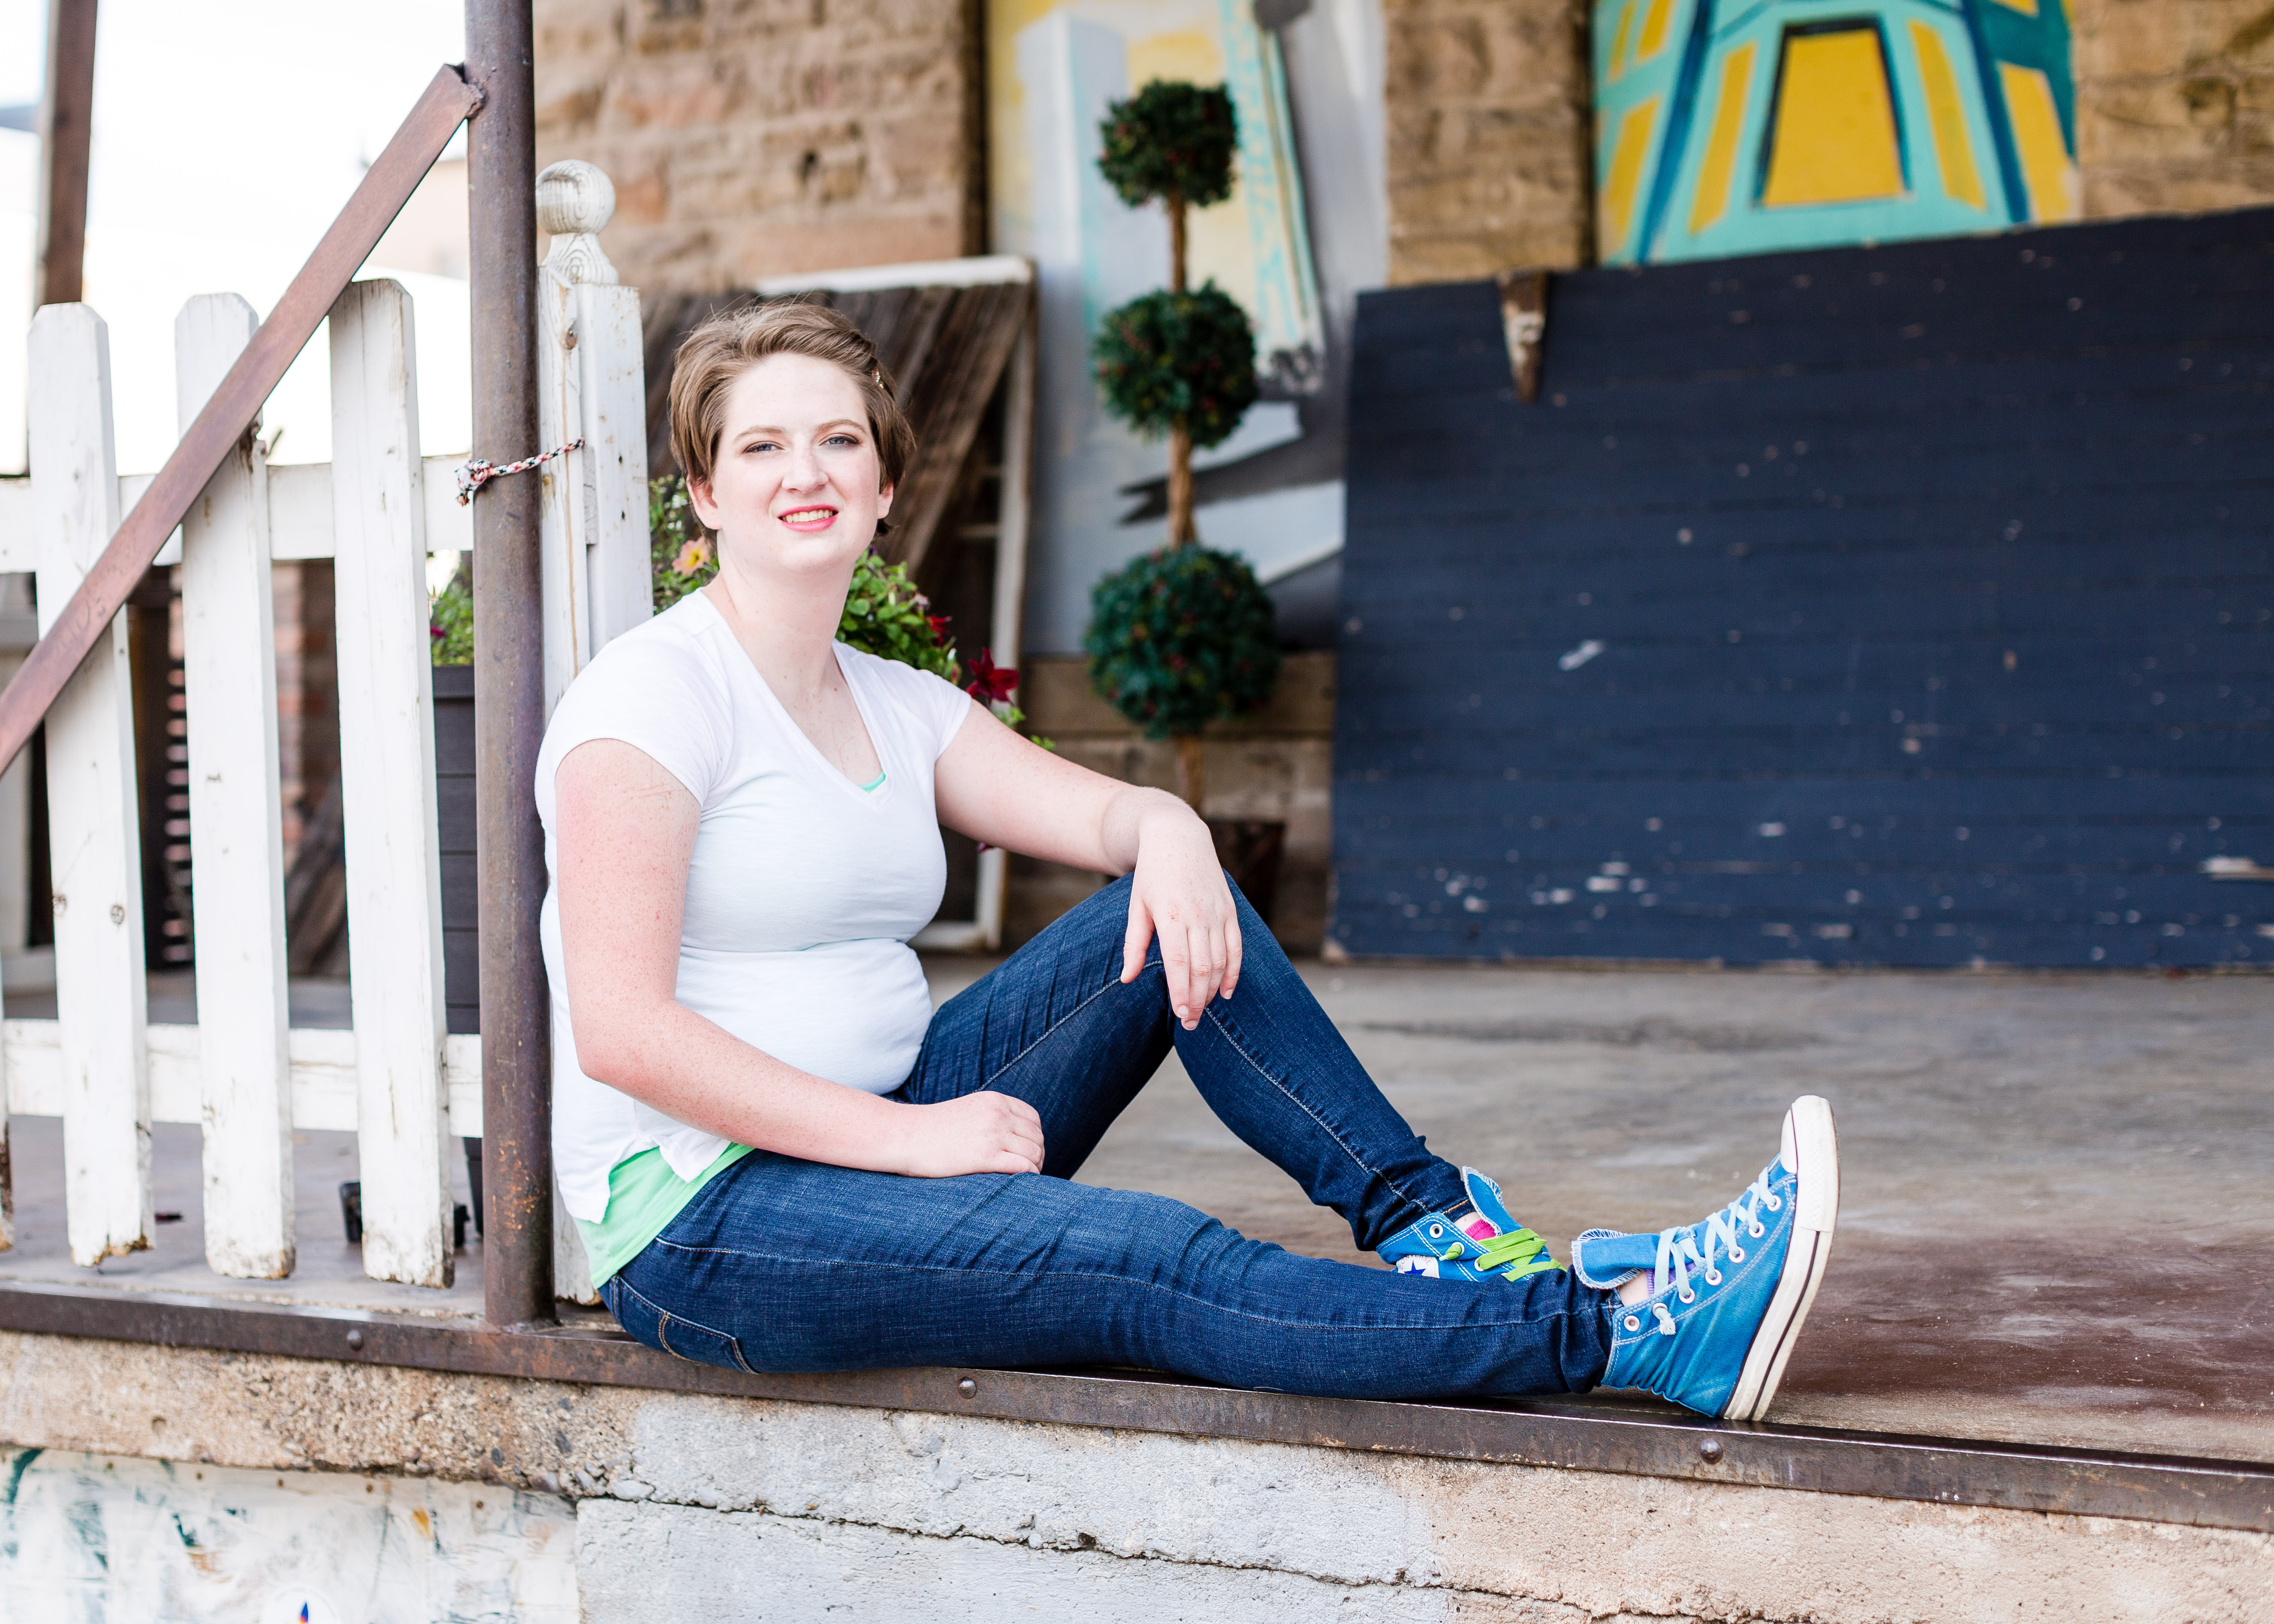 Senior girl wearing a white t-shirt and blue jeans sits with one leg bent and the other extended in a colorful alley